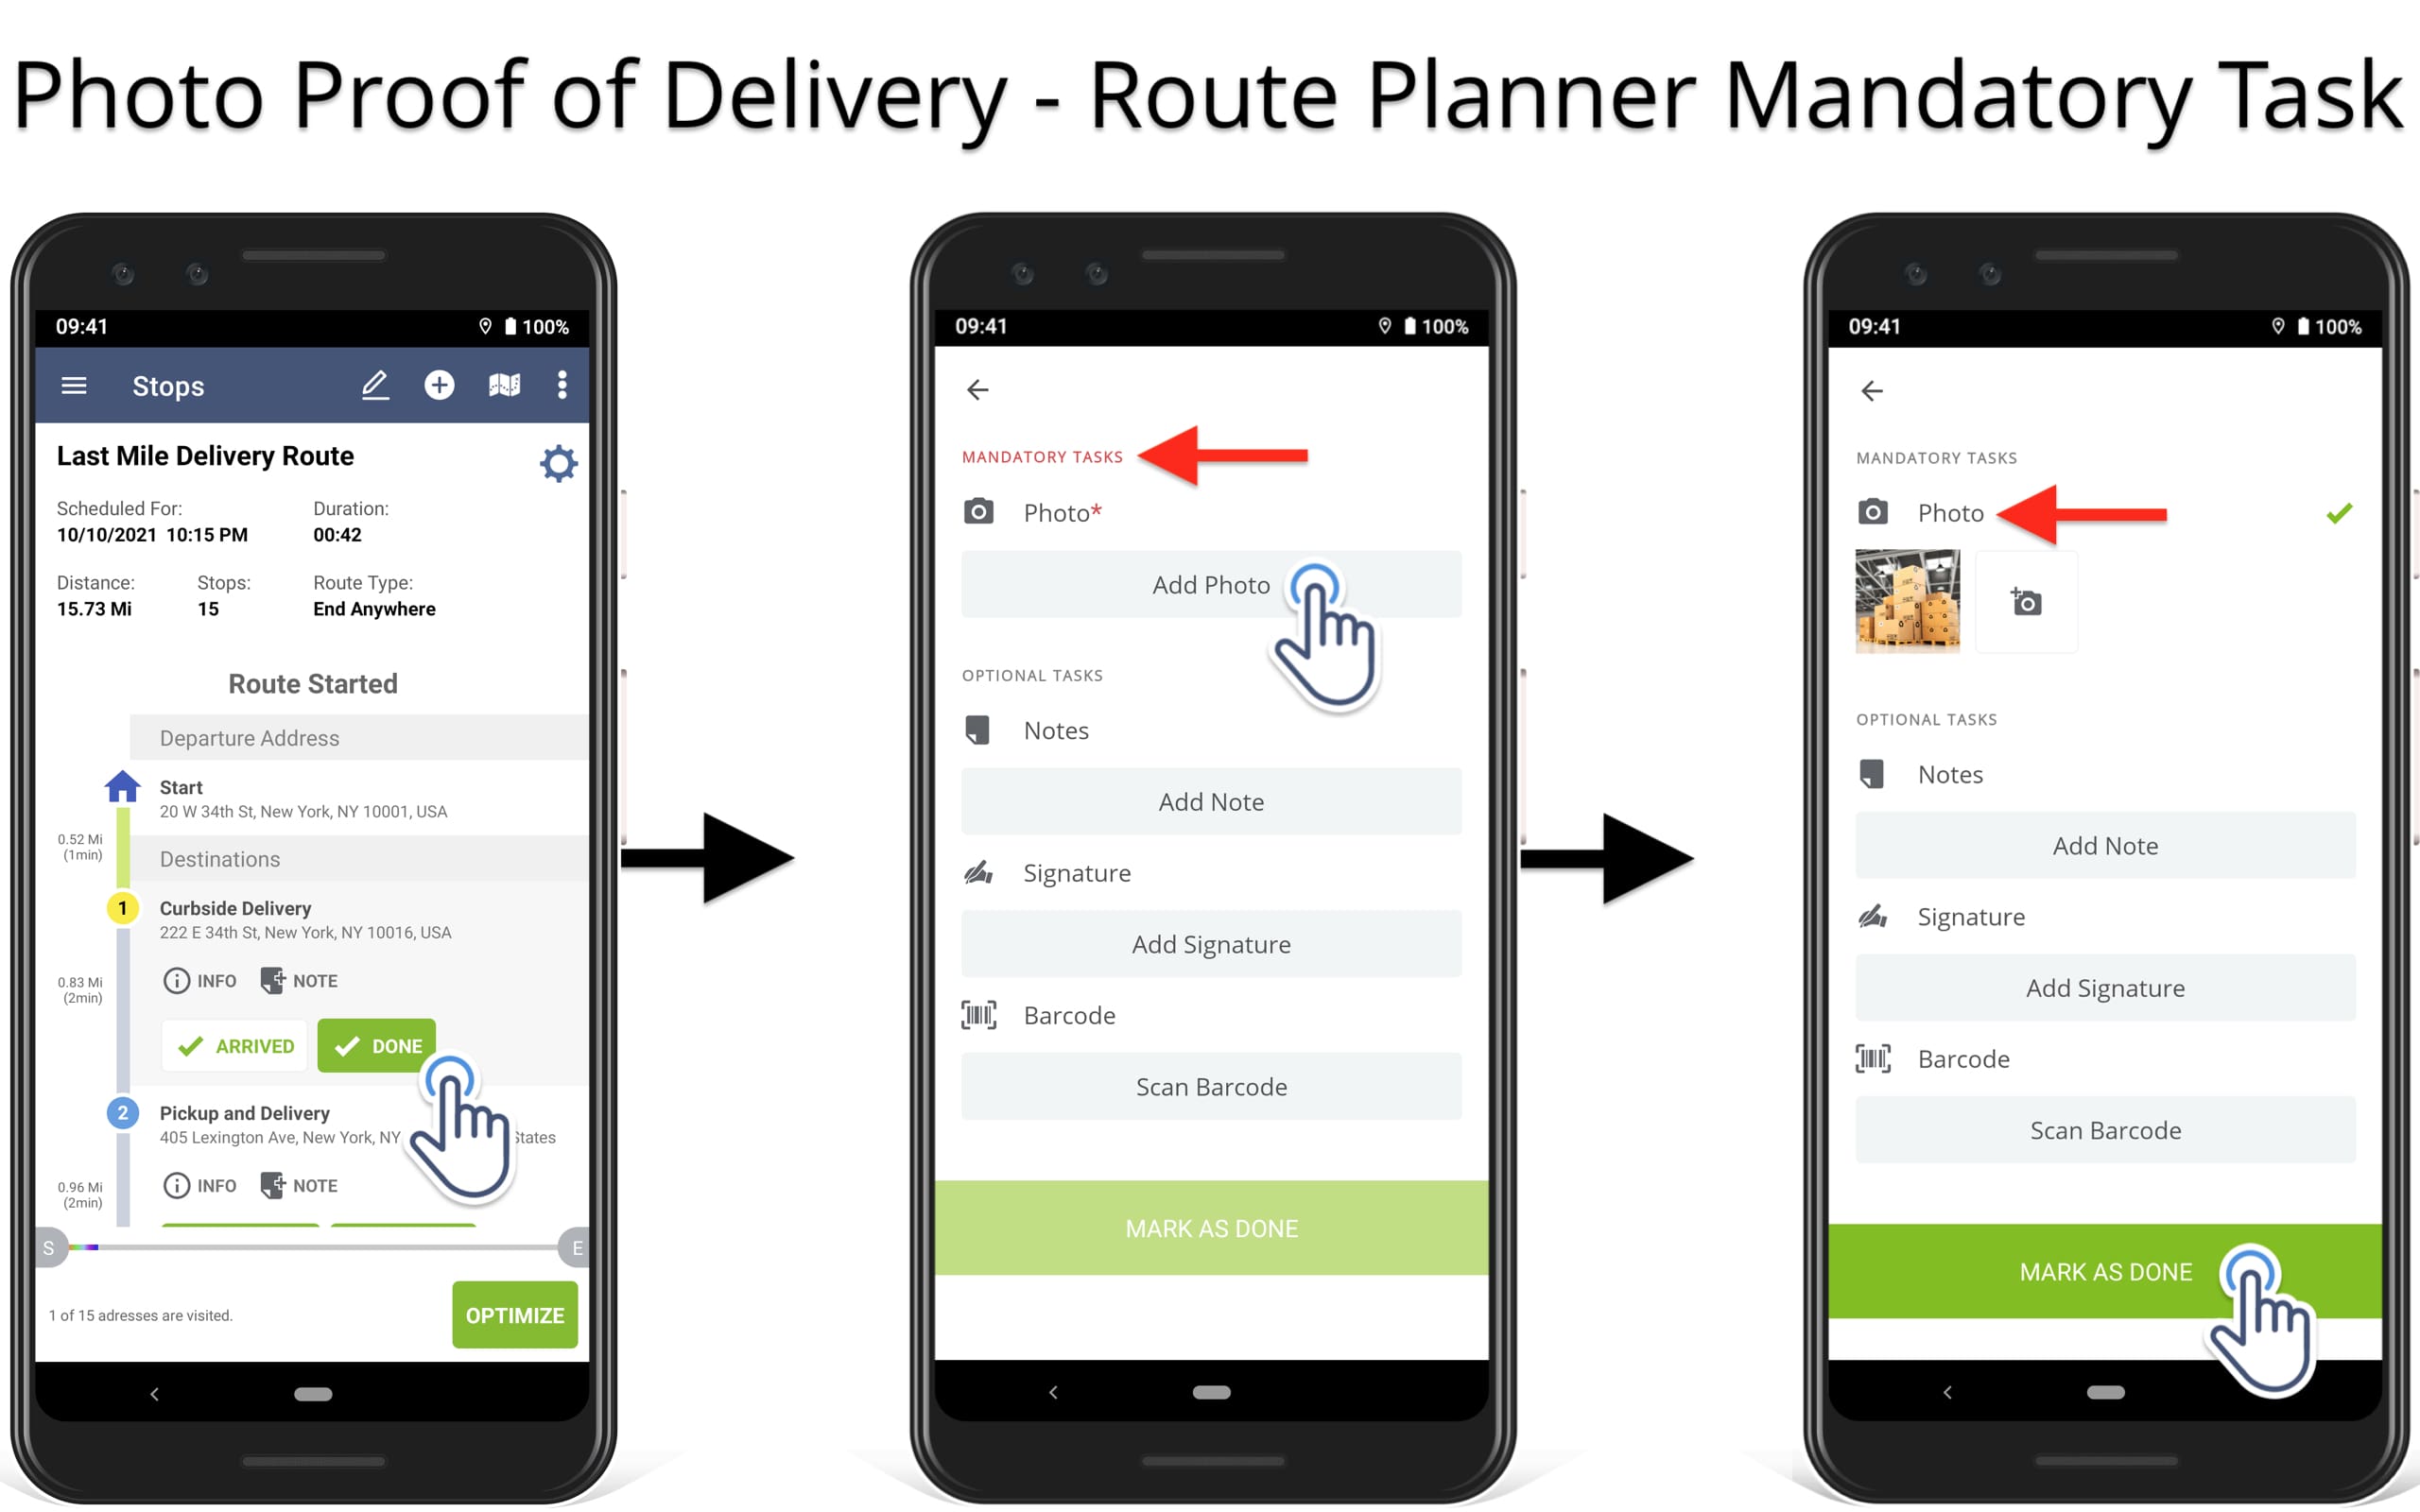 Route planner mandatory tasks for collecting images and photos as electronic proof of delivery.